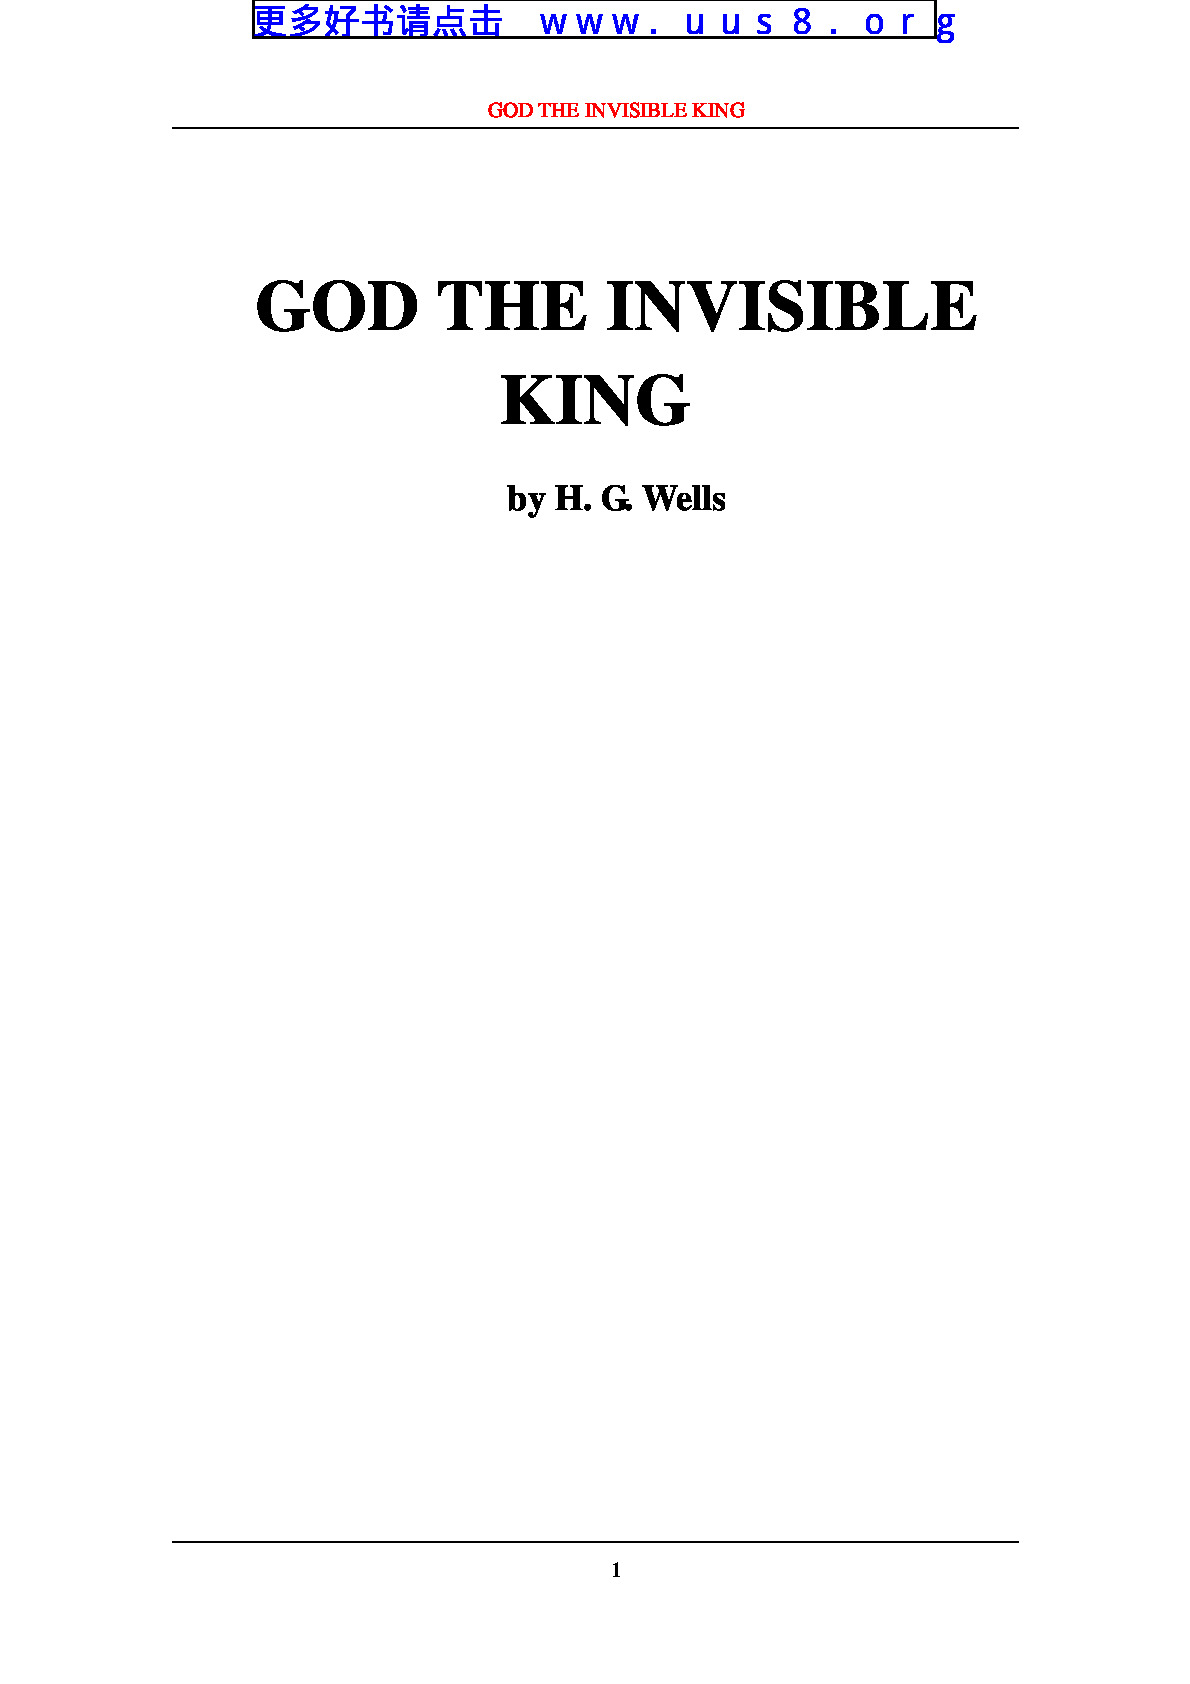 GOD_THE_INVISIBLE_KING(上帝,隐形王)